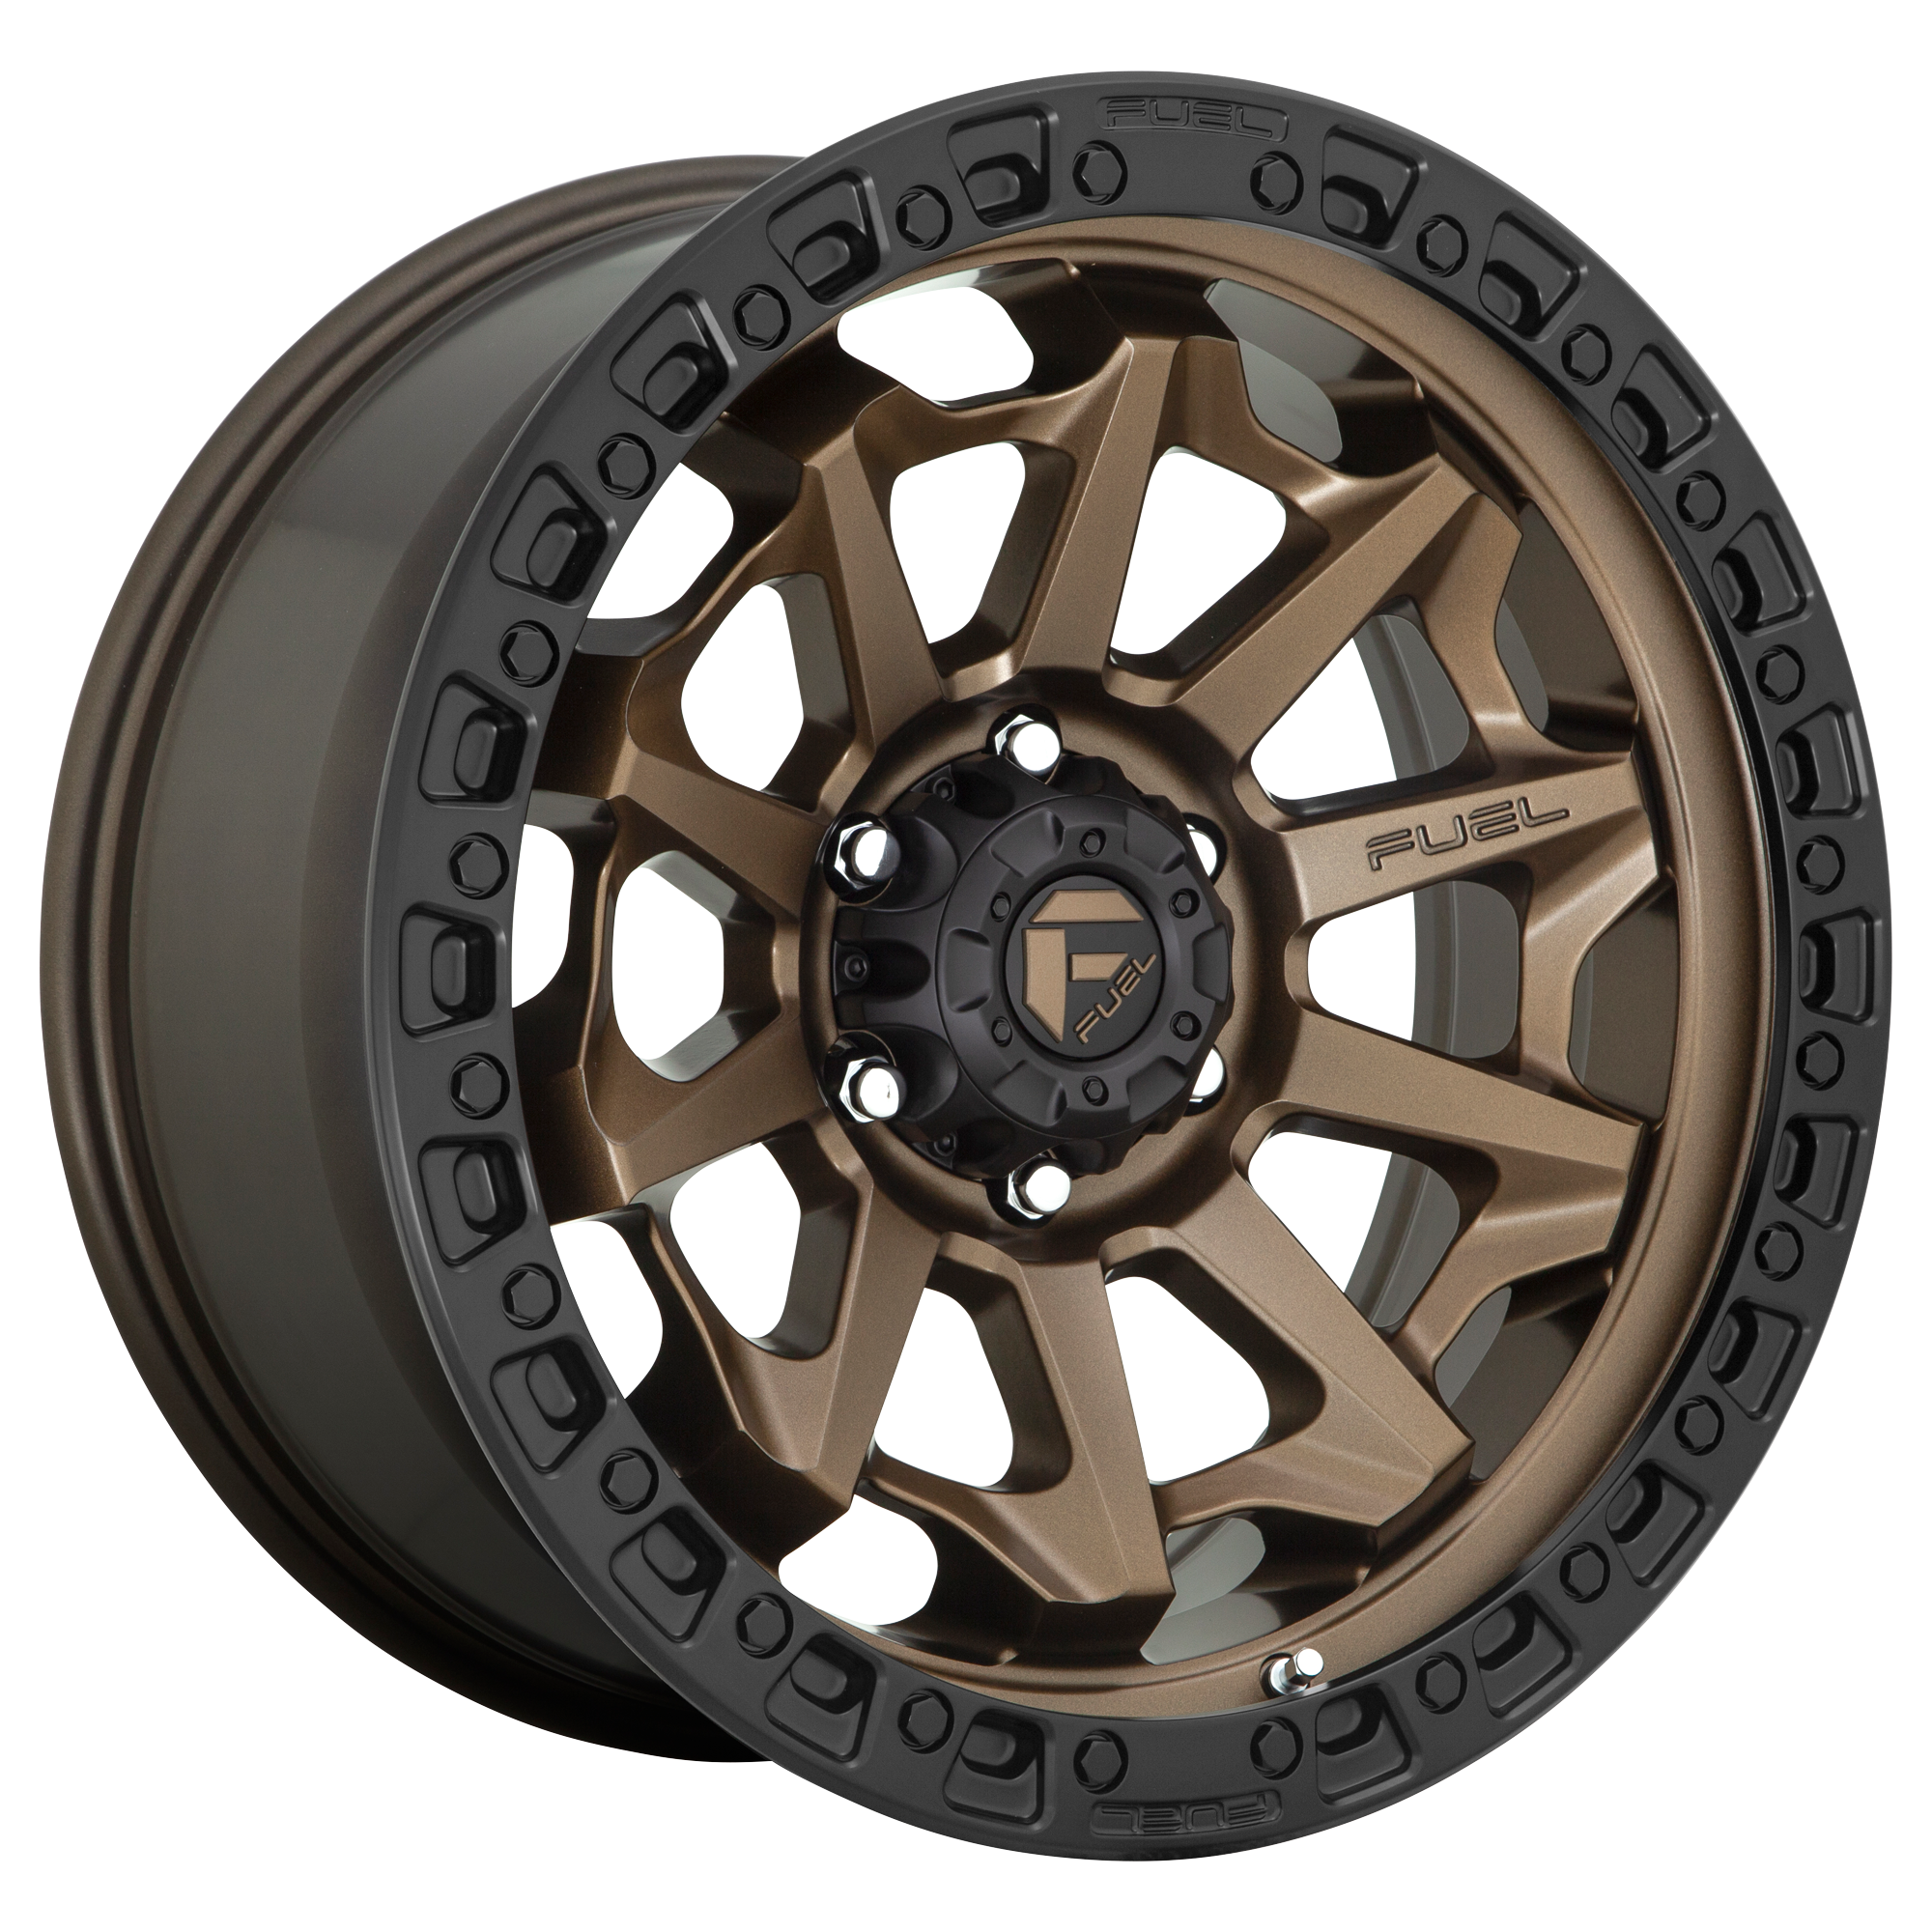 COVERT 18x9 6x139.70 MATTE BRONZE BLACK BEAD RING (1 mm) - Tires and Engine Performance